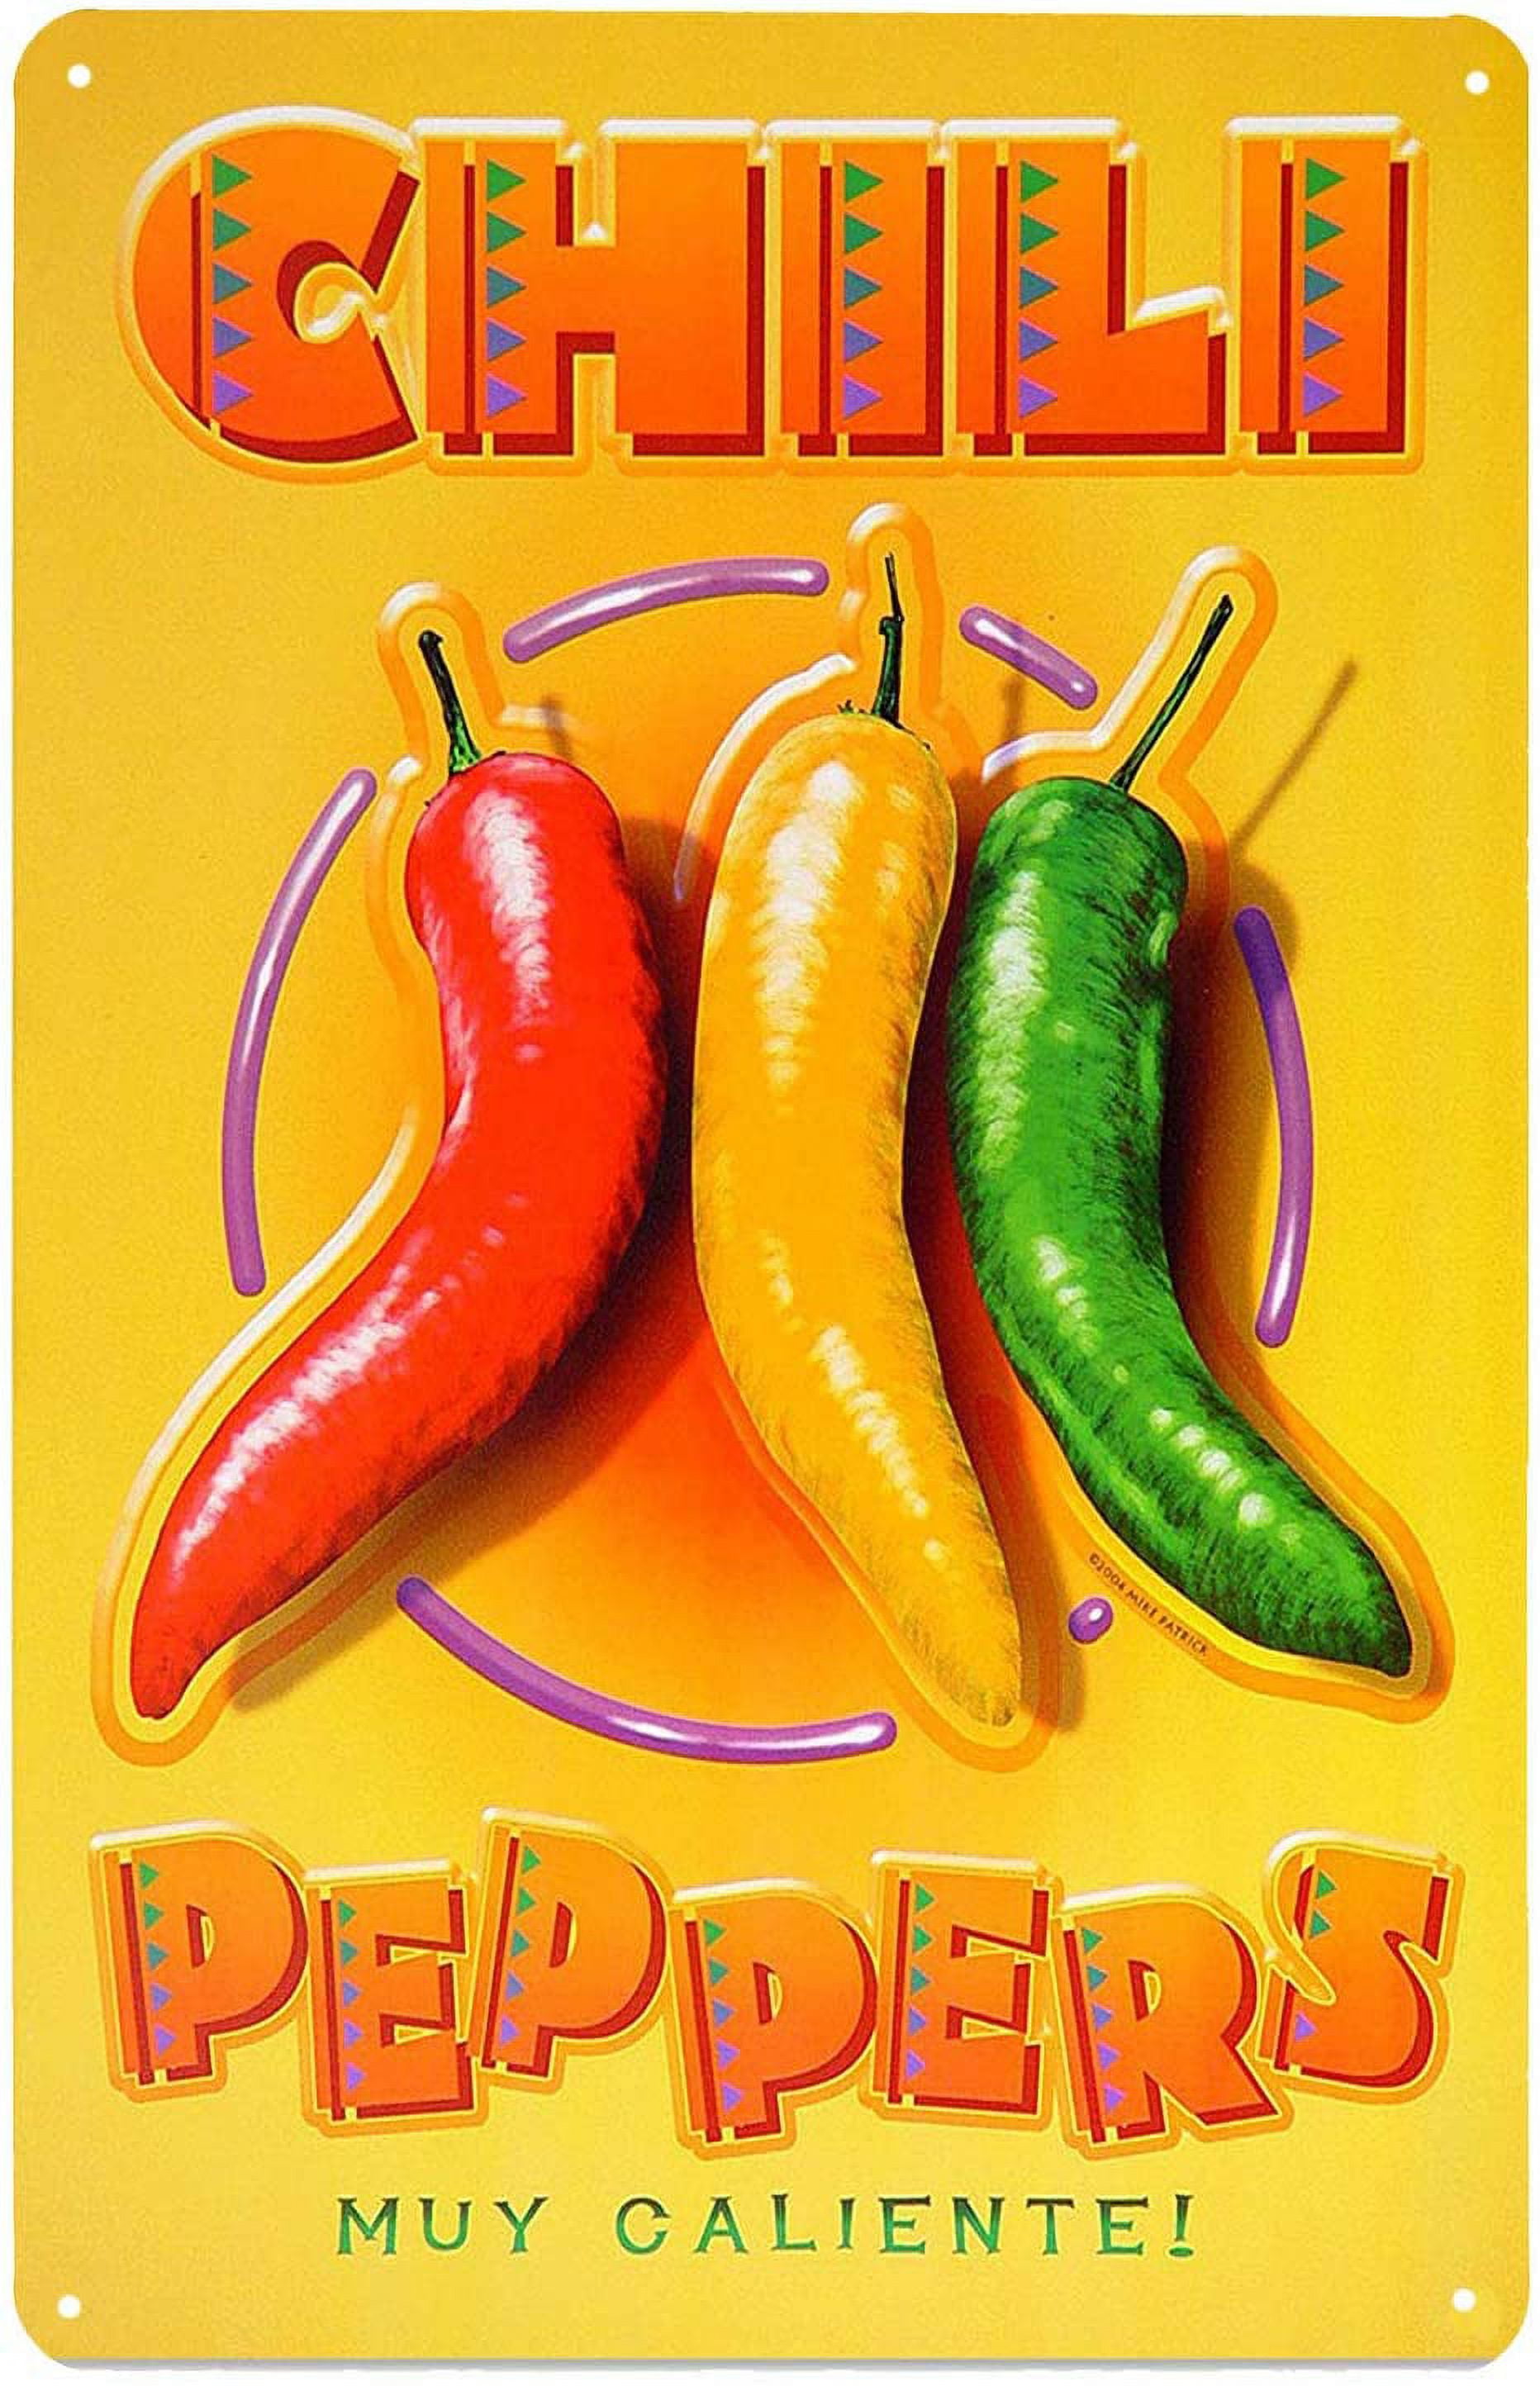  Ibusy Funny Vintage Chili Pepper Metal Signs,The